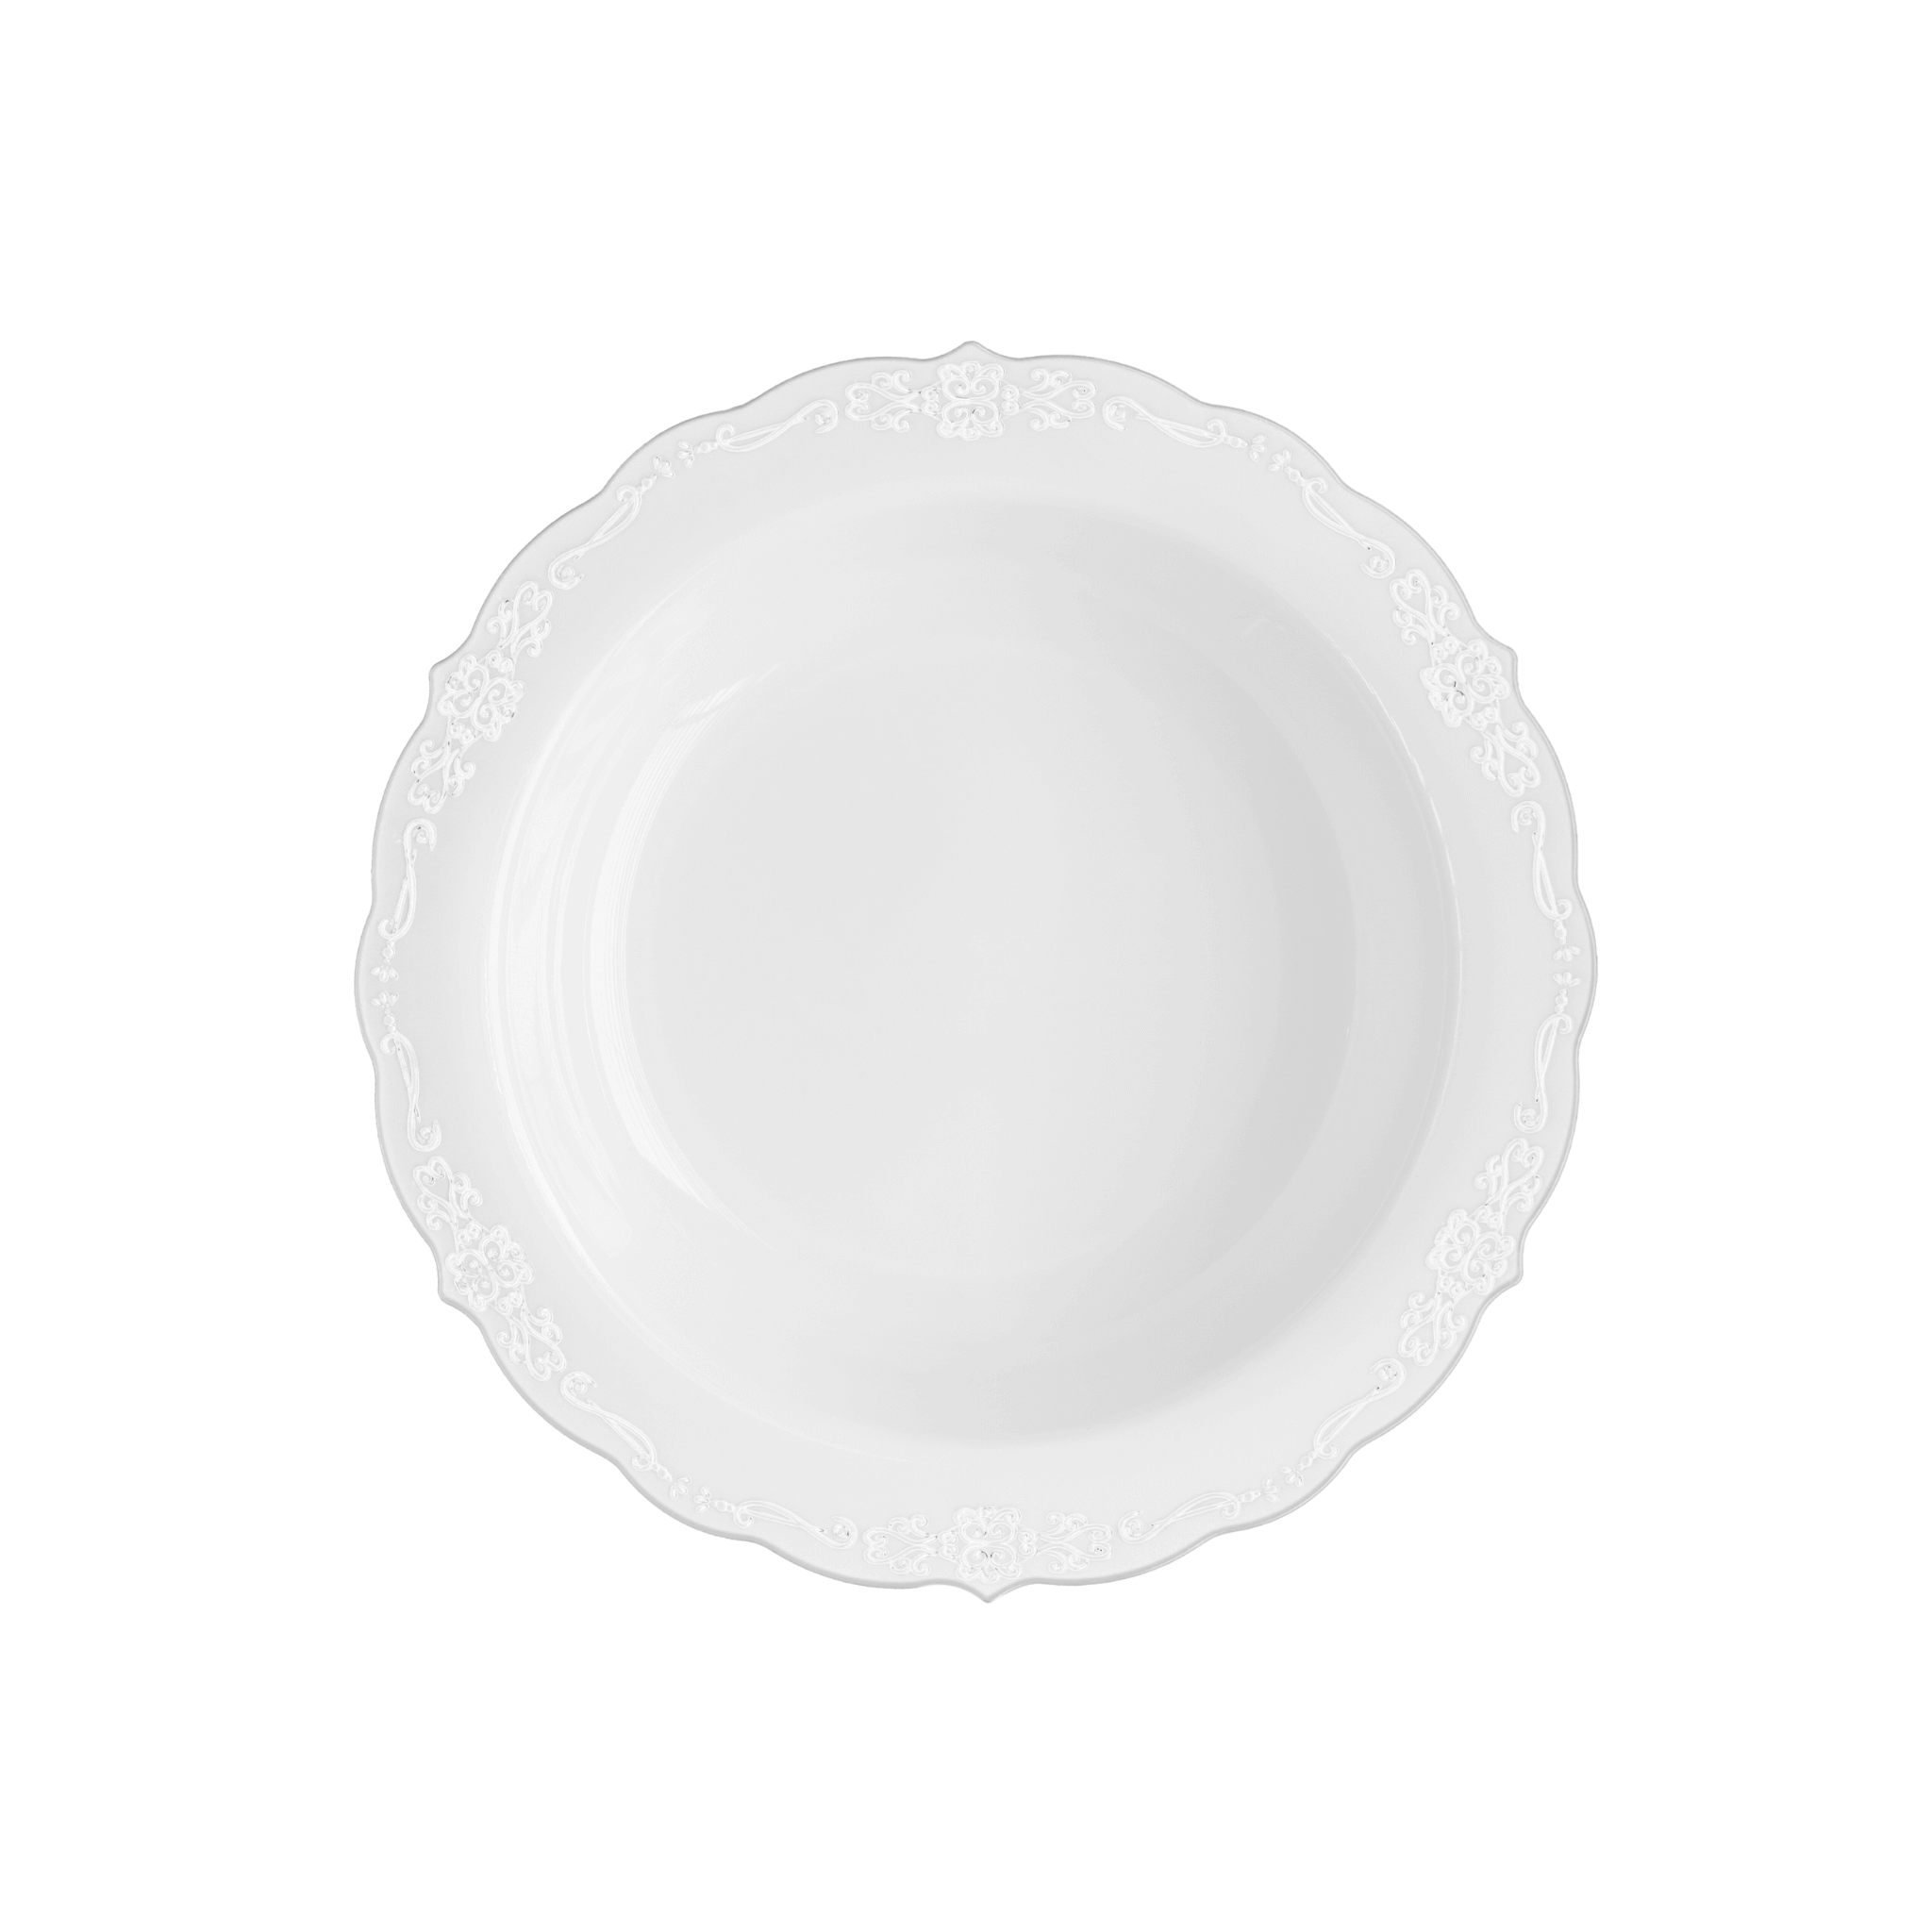 12 oz. Clear Victorian Design Plastic Bowls (120 Count) - Yom Tov Settings